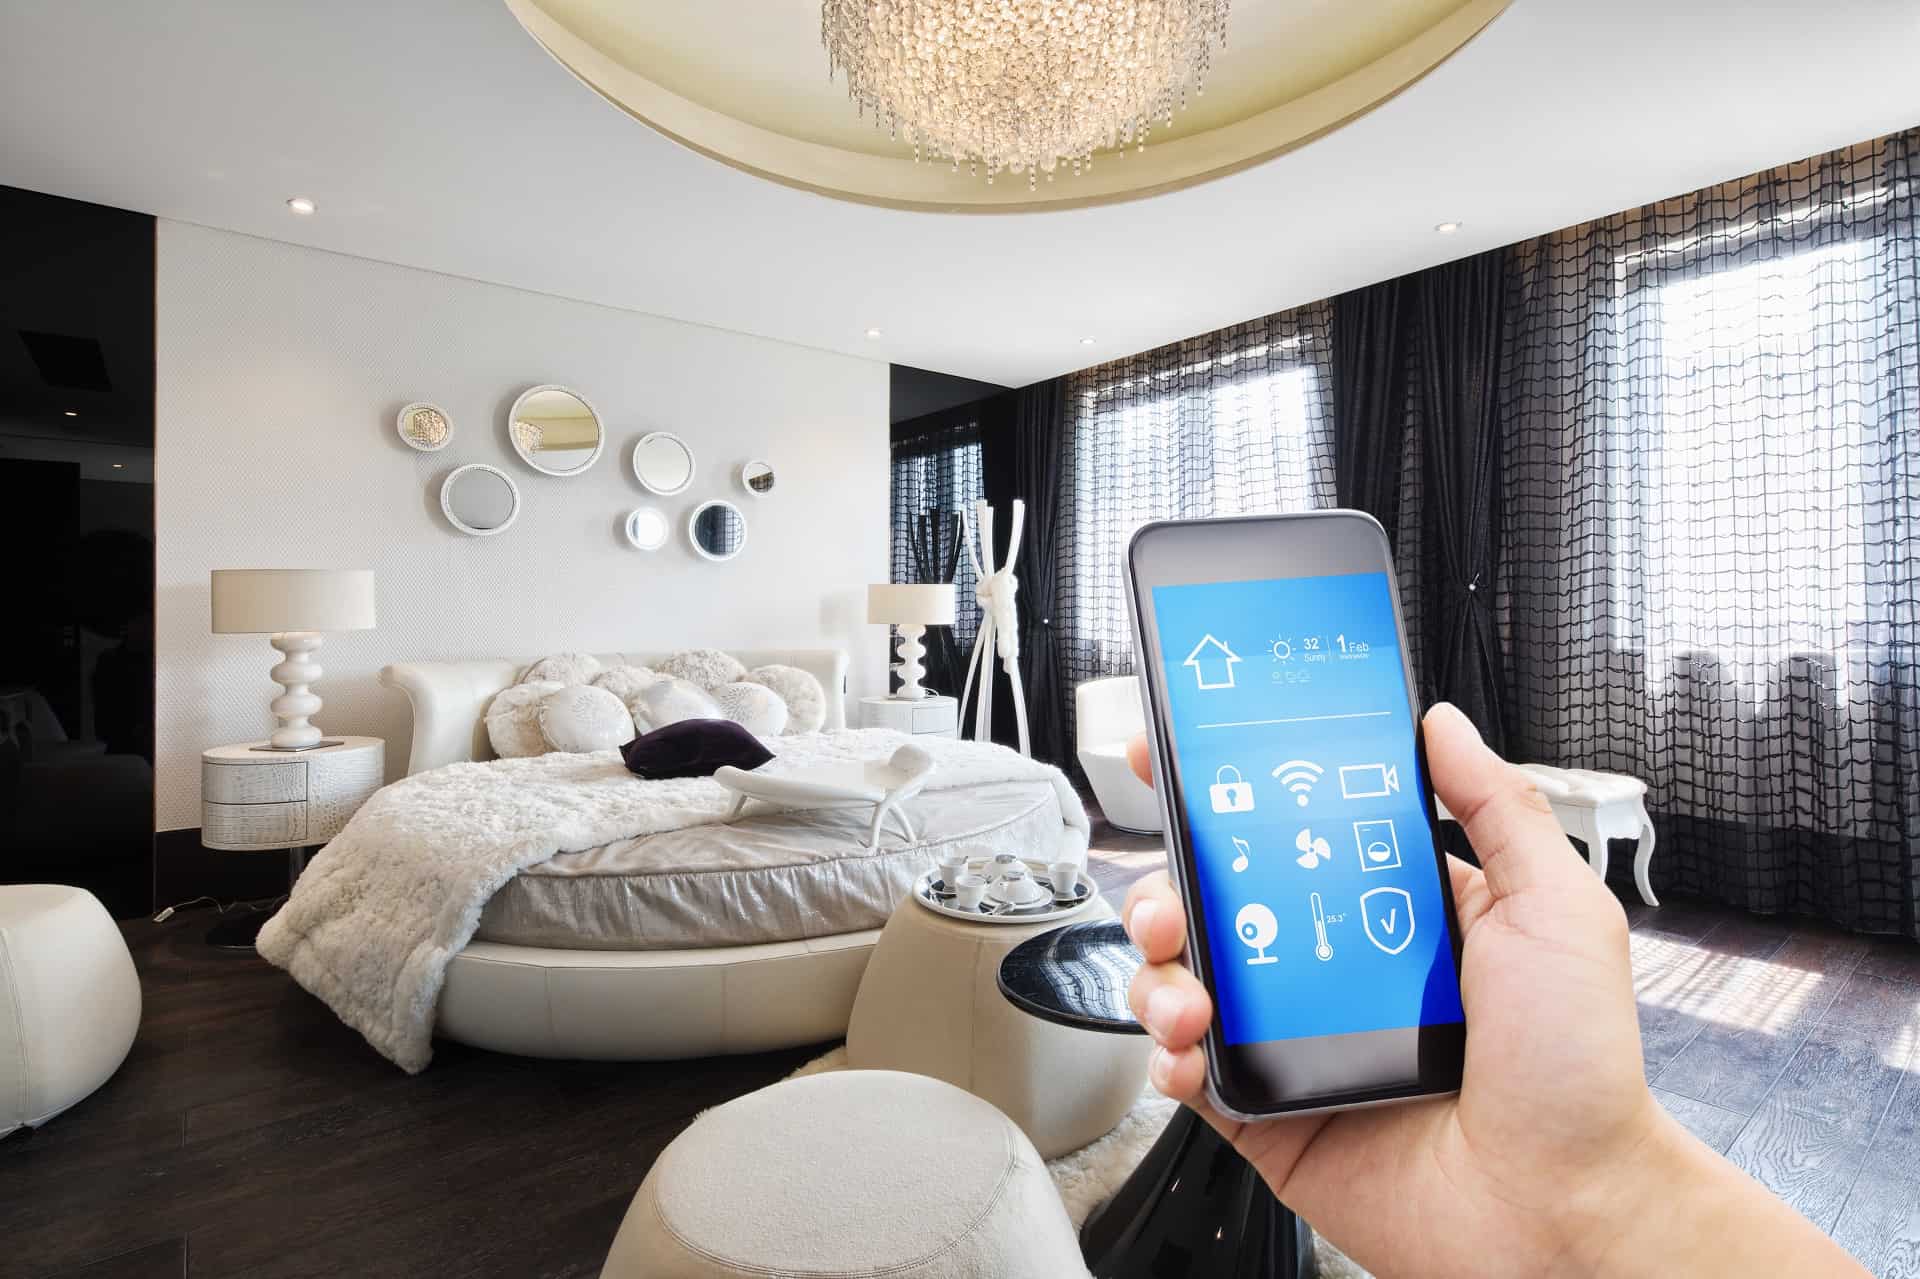 Smart phone with a smart home app in foreground, bedroom in the background.